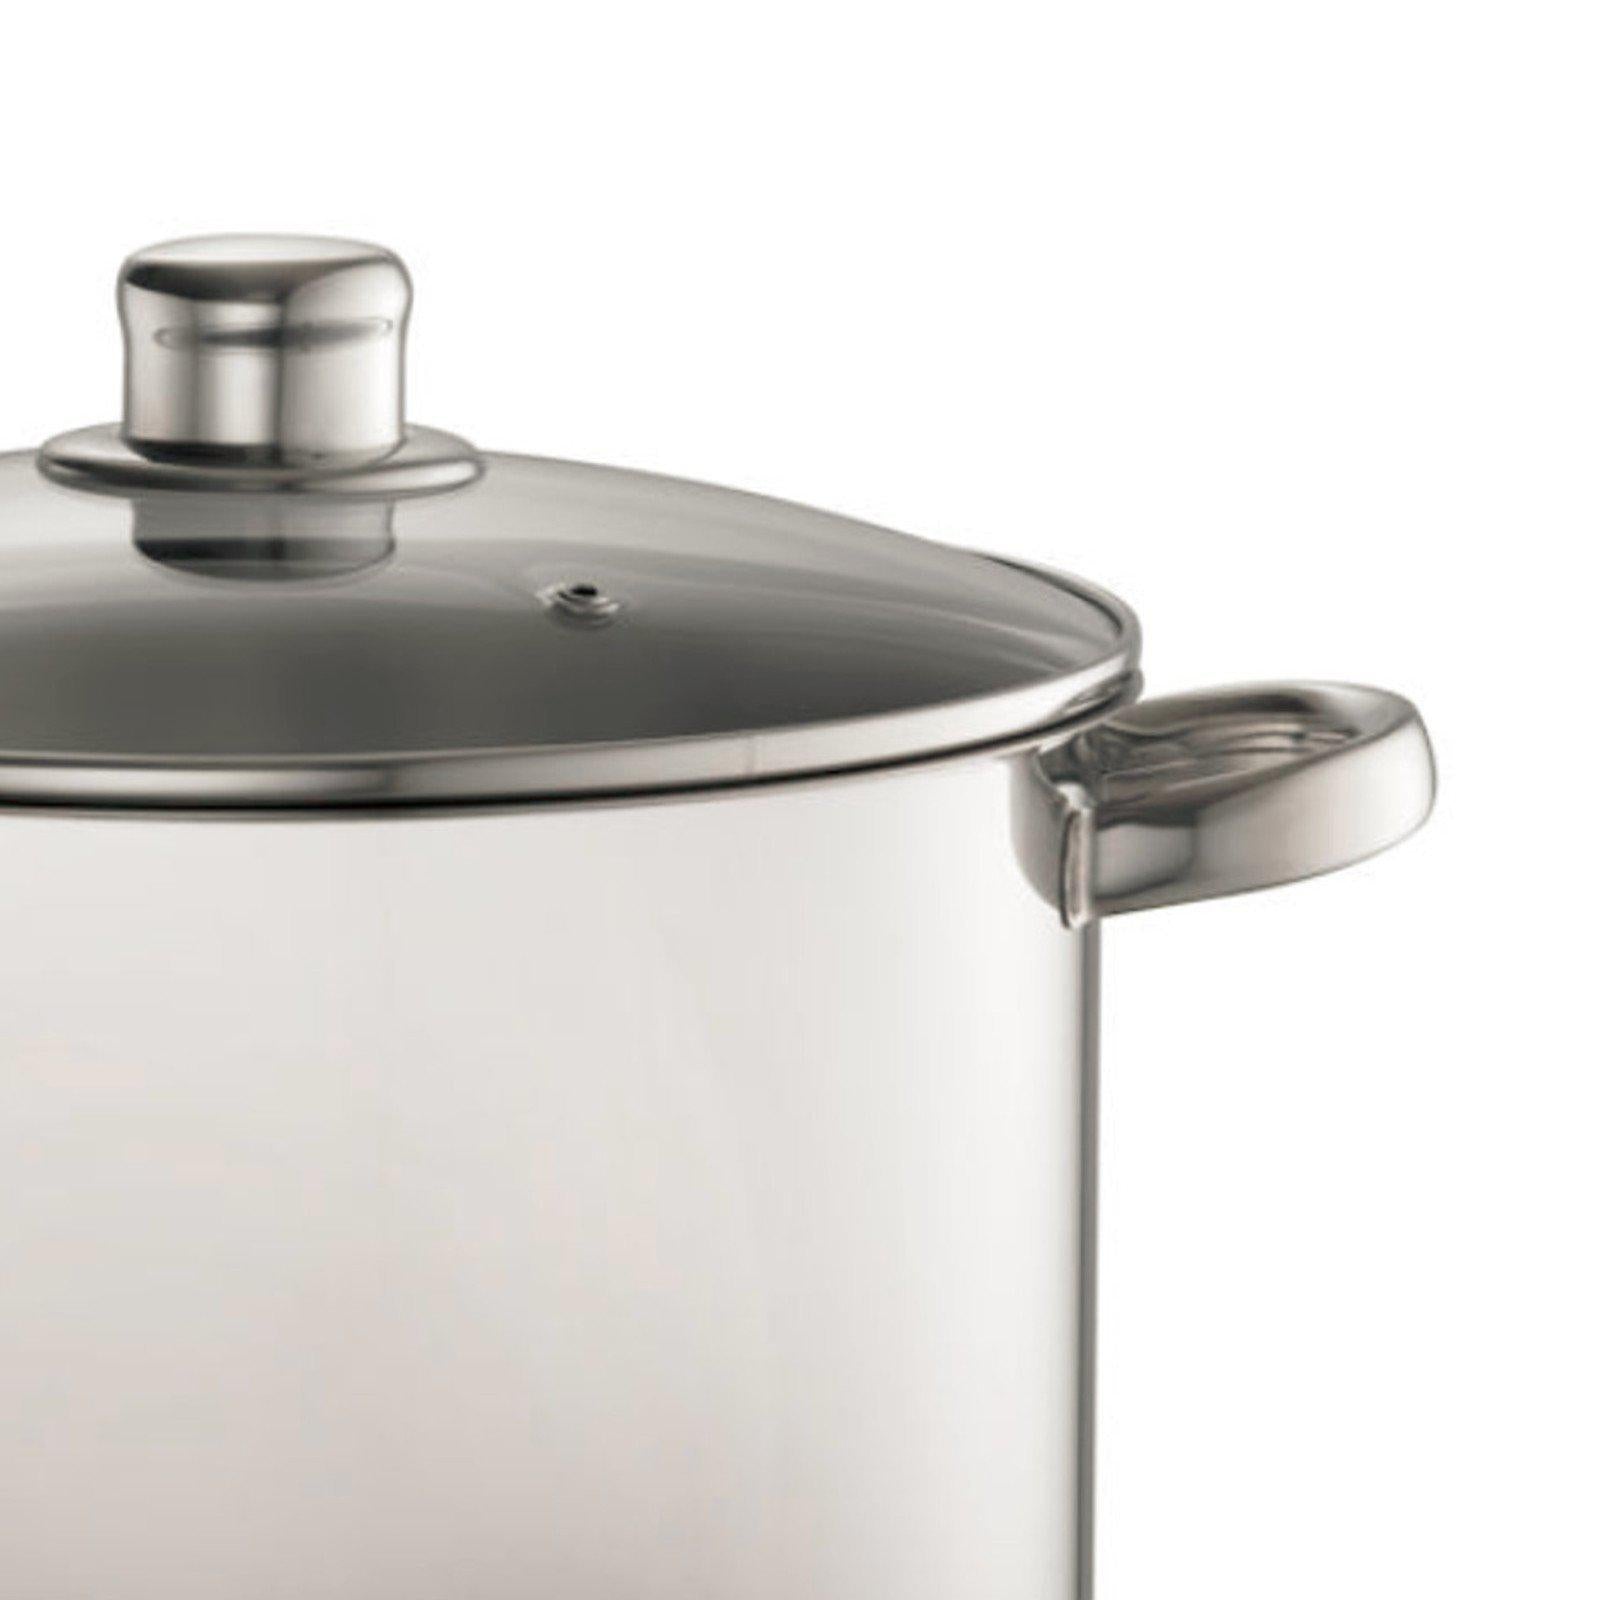 Davis & Waddell 14 Litre Stock Pot With Glass Lid-stock pot-Chef's Quality Cookware